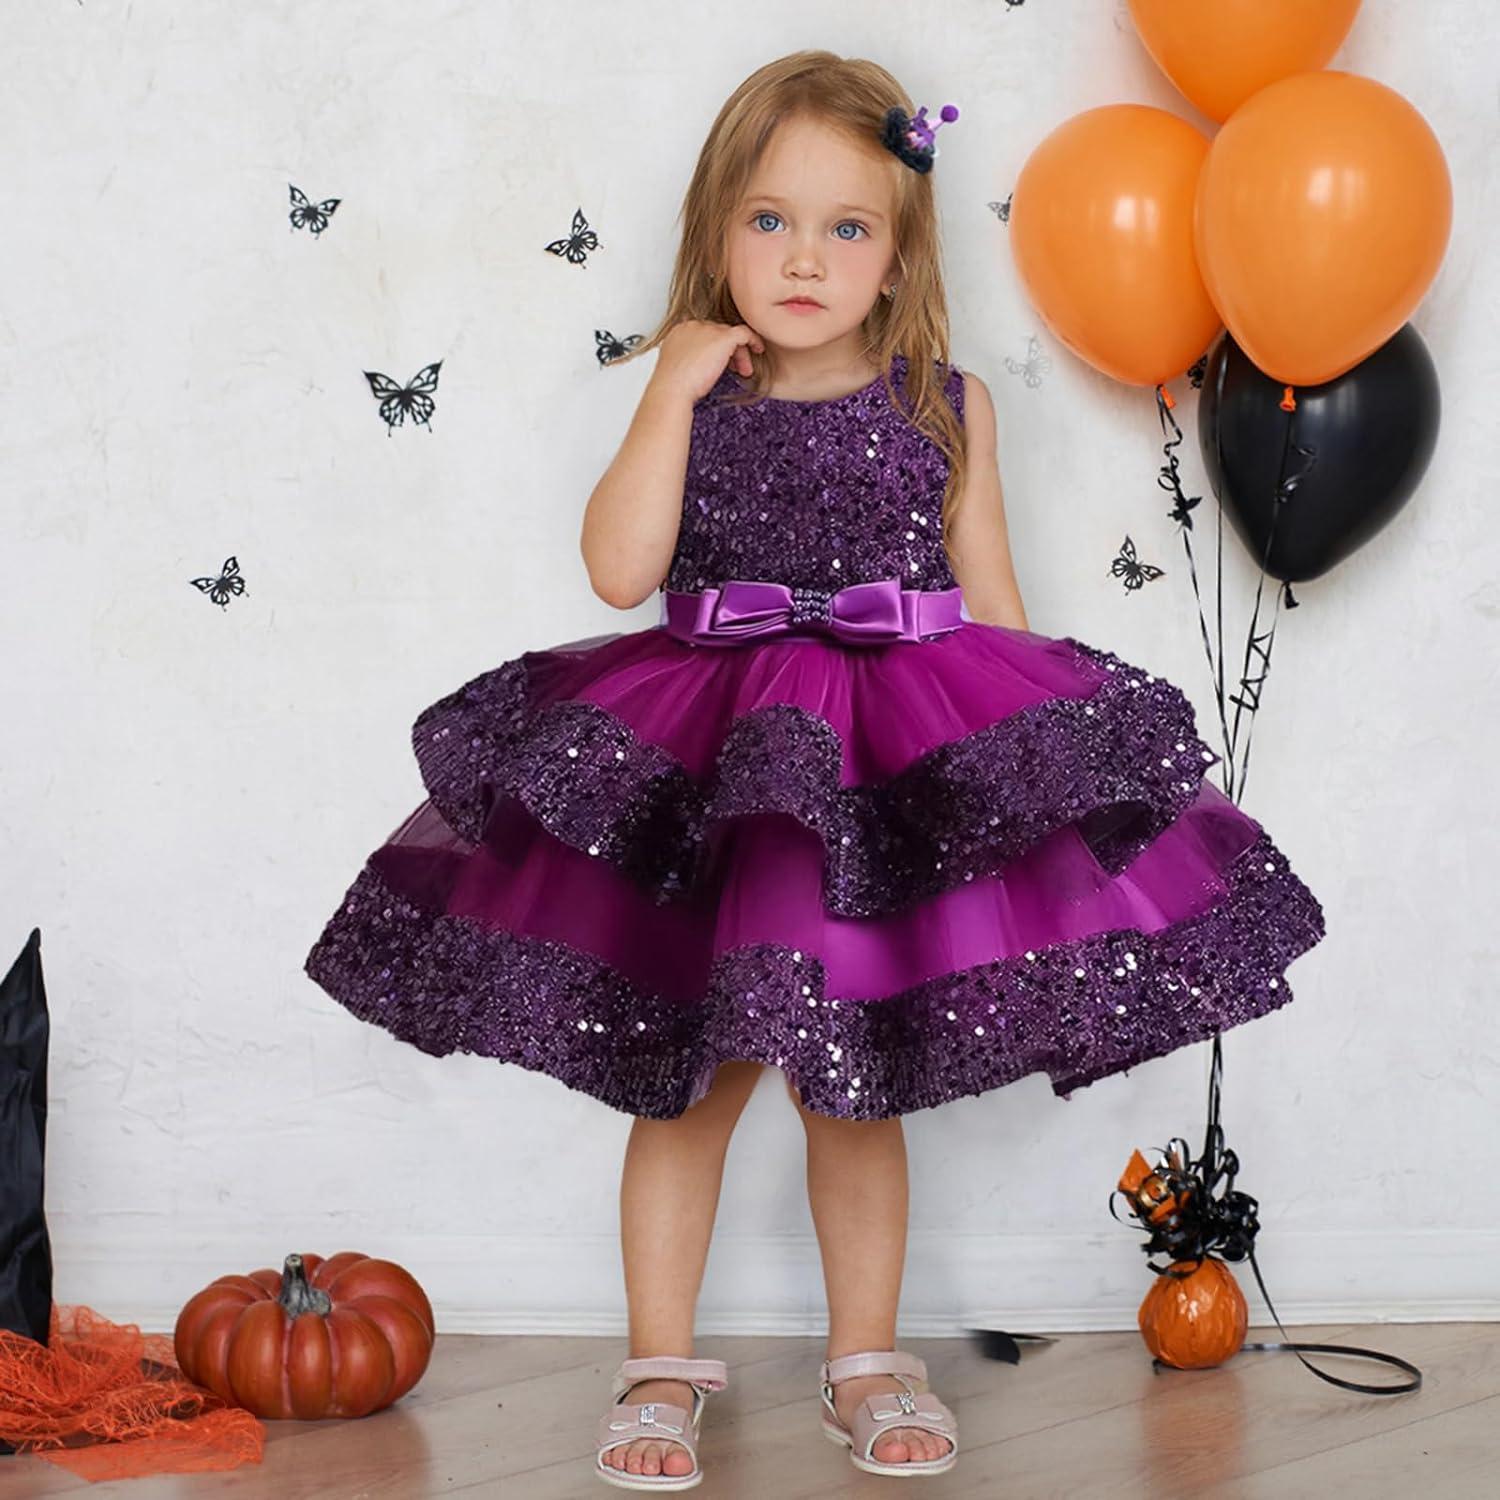 How to Care for Formal Girls Dresses – Kid's Dream